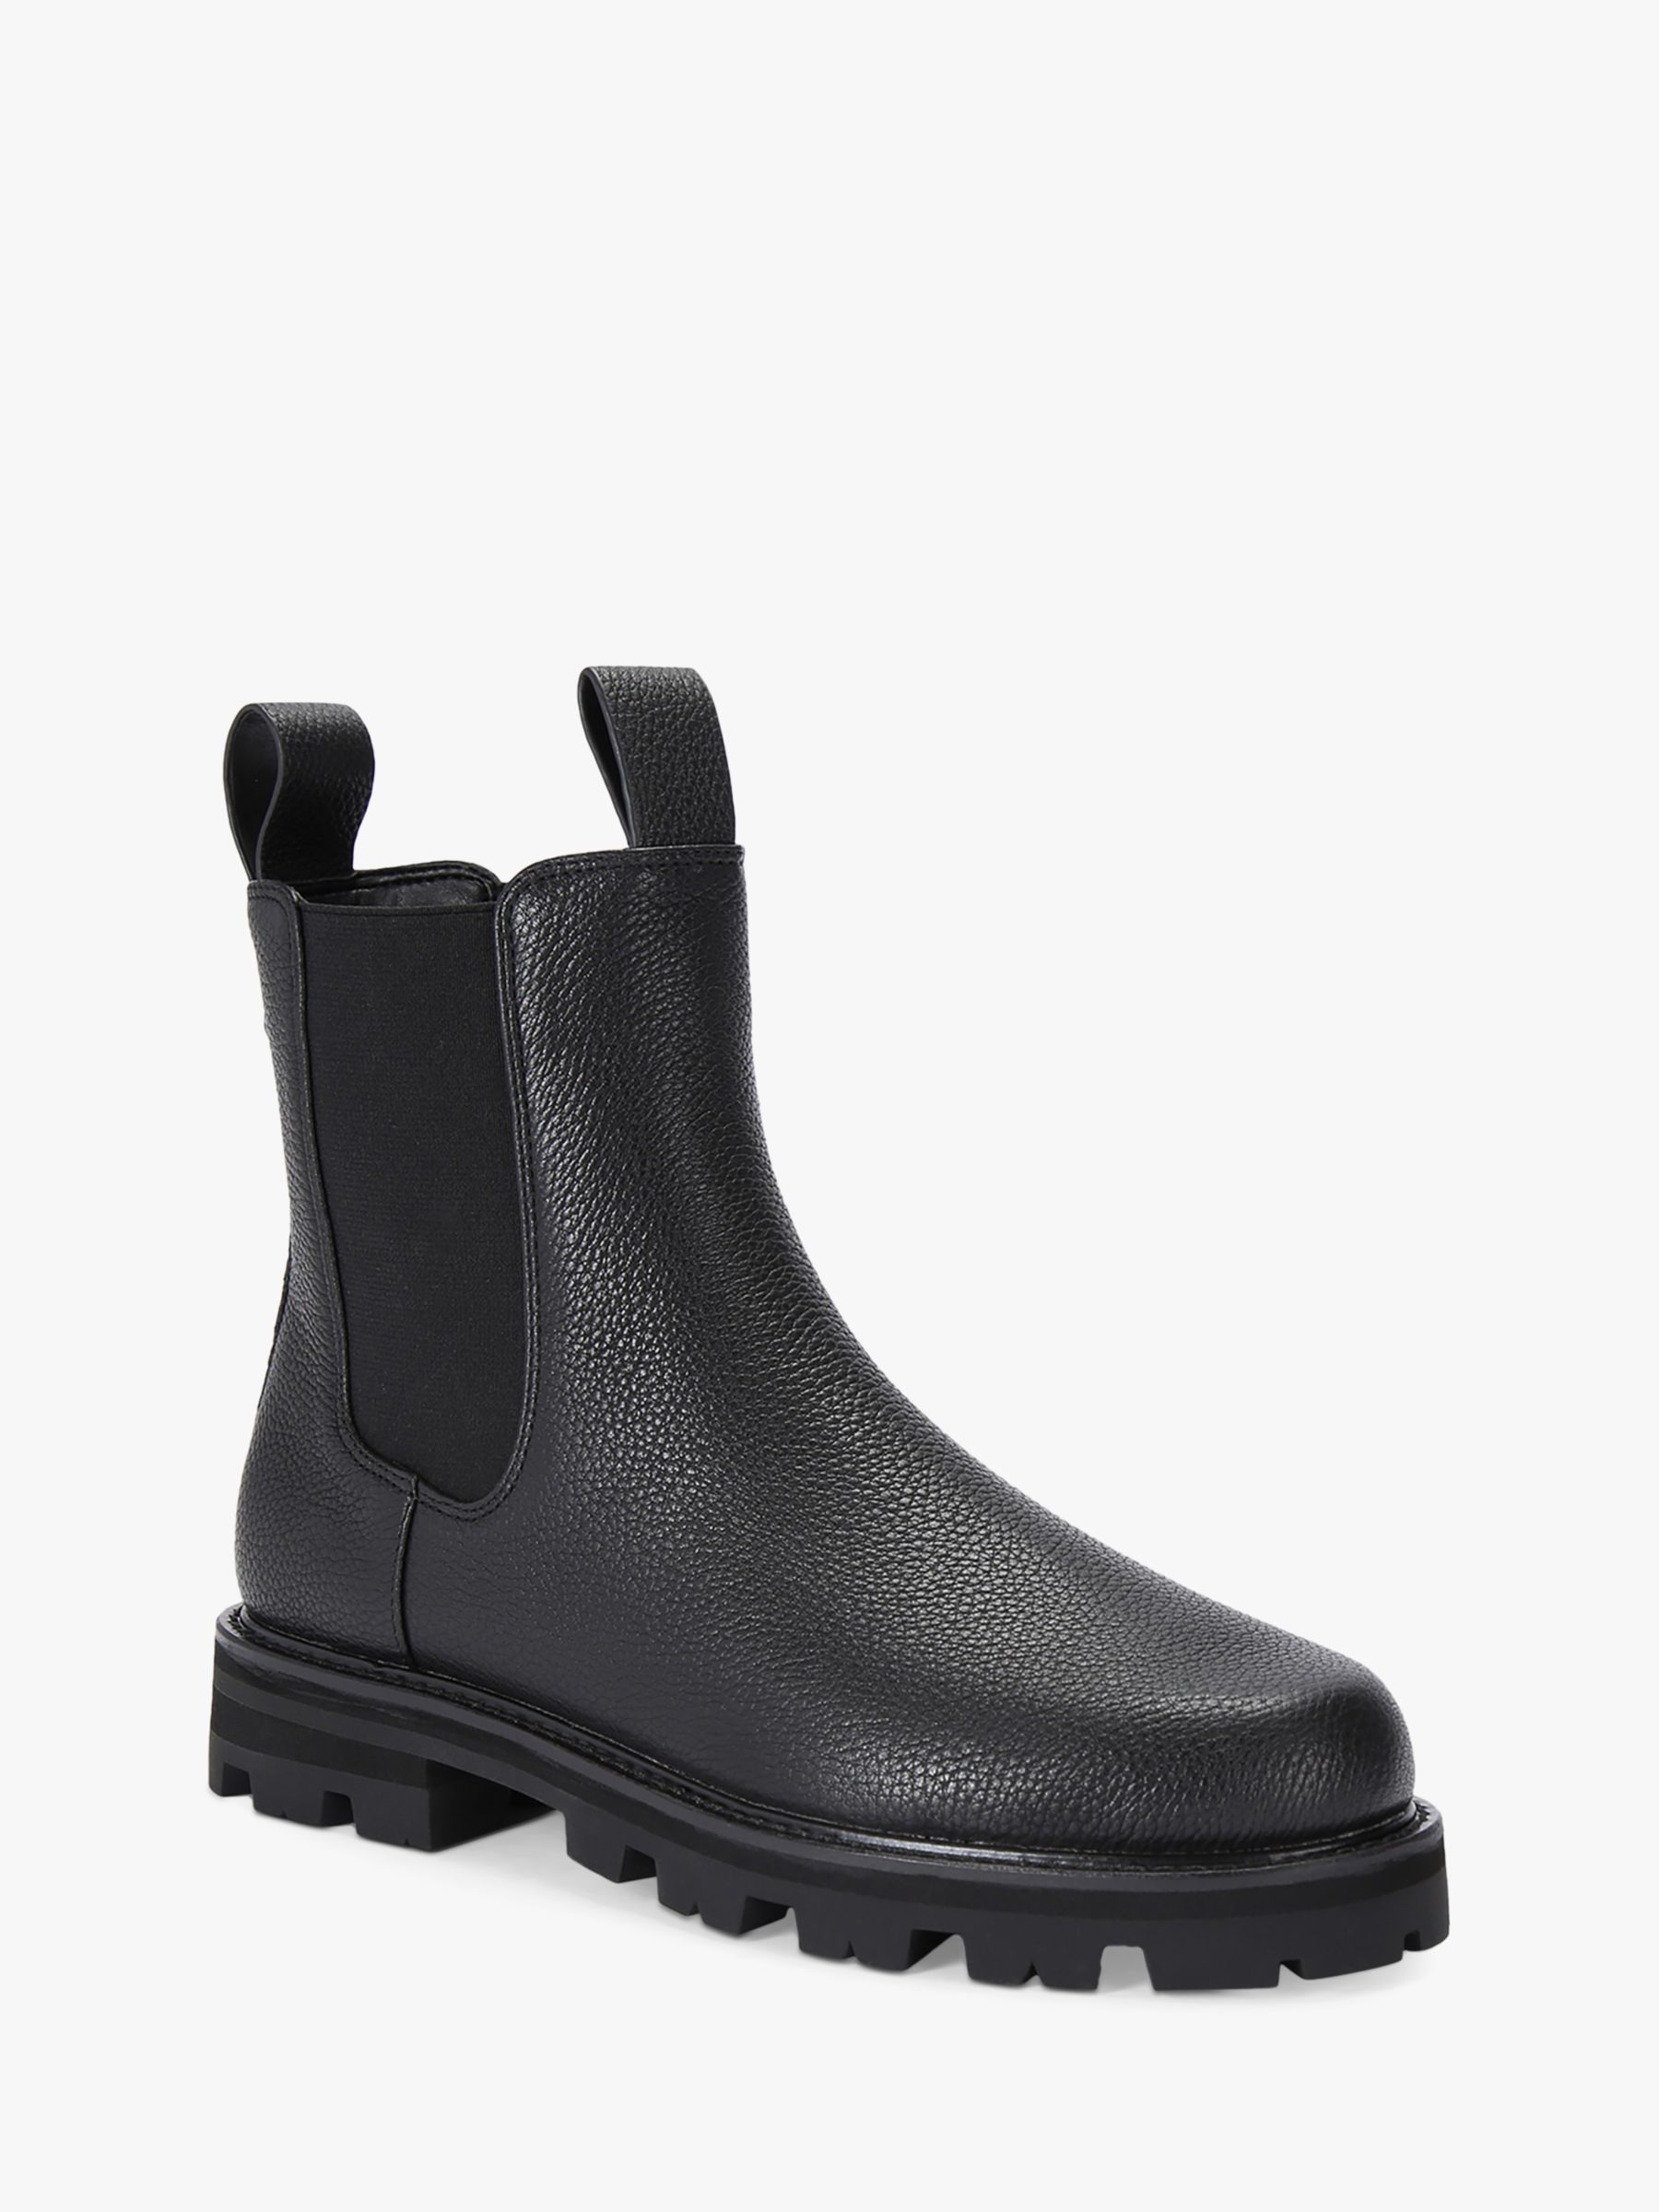 Buy Kurt Geiger London Carnaby Leather Chelsea Boots, Black Online at johnlewis.com